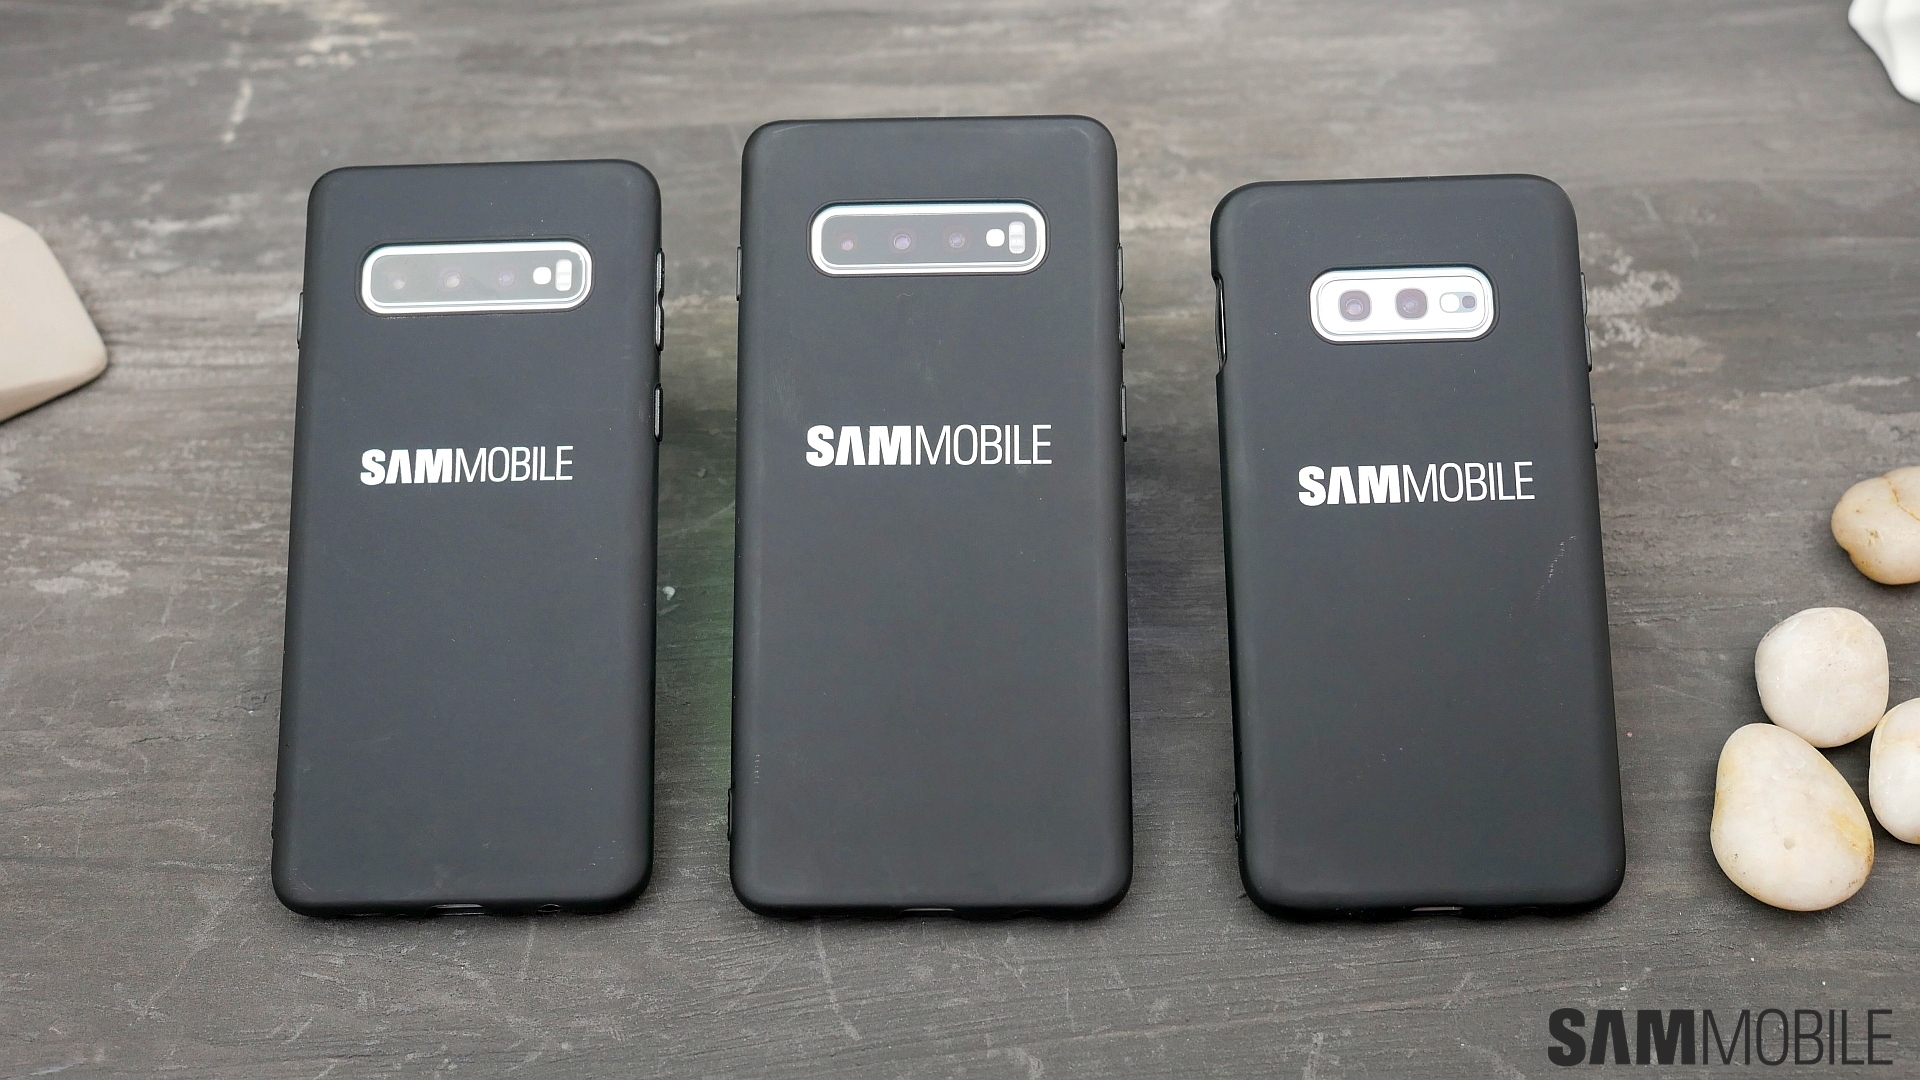 samsung knows what they did, Samsung Sam